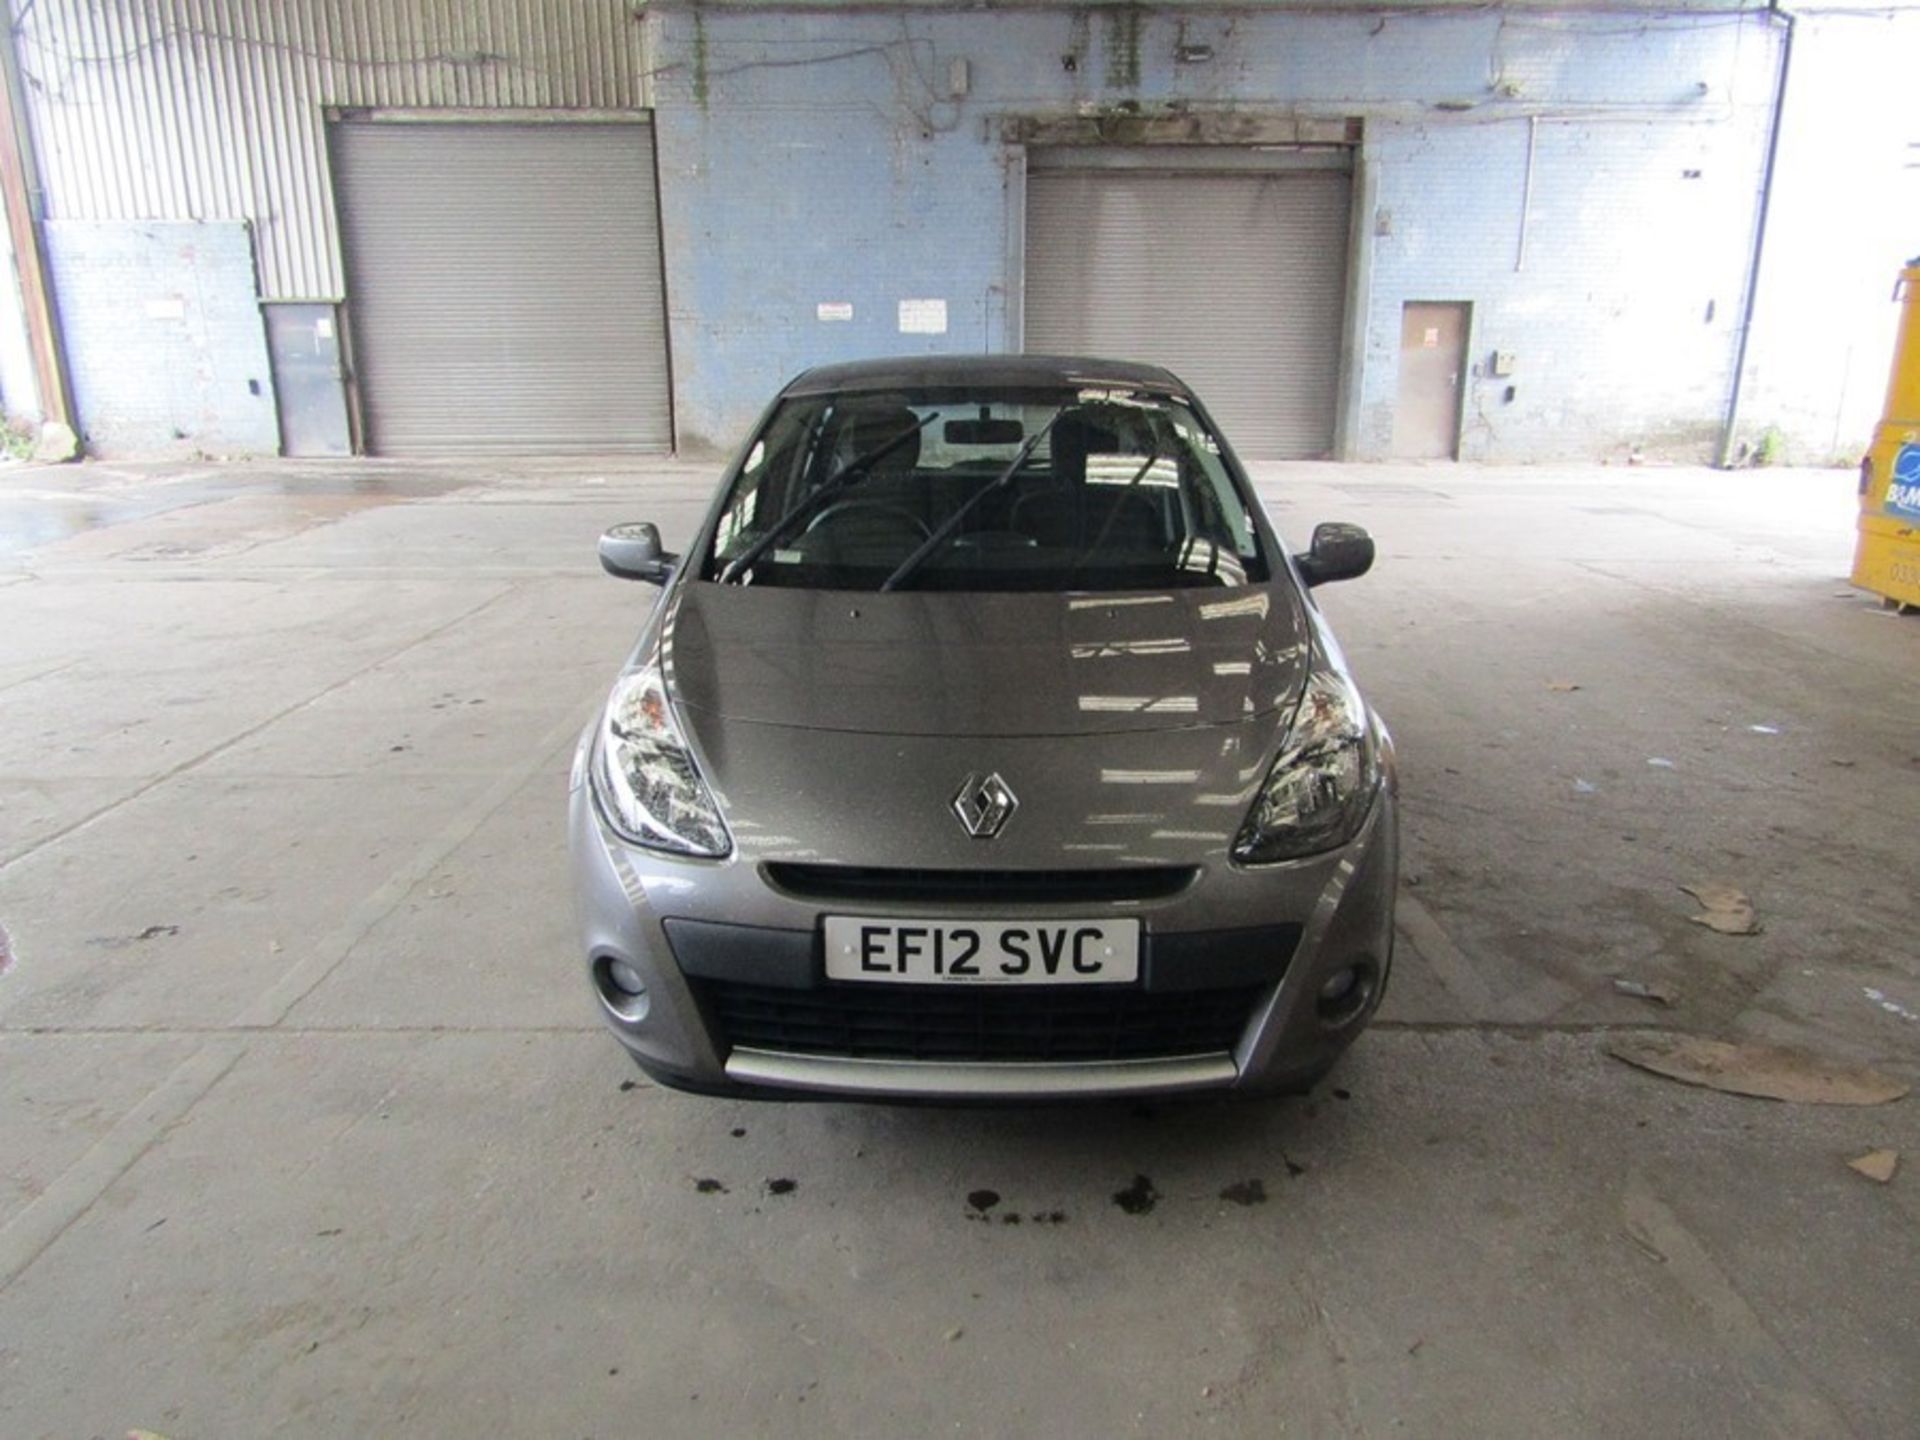 2012 Renault Clio Expression Plus 16V 1.2i, 29,991 miles (unchecked), MOT until 29th May 2020, 2